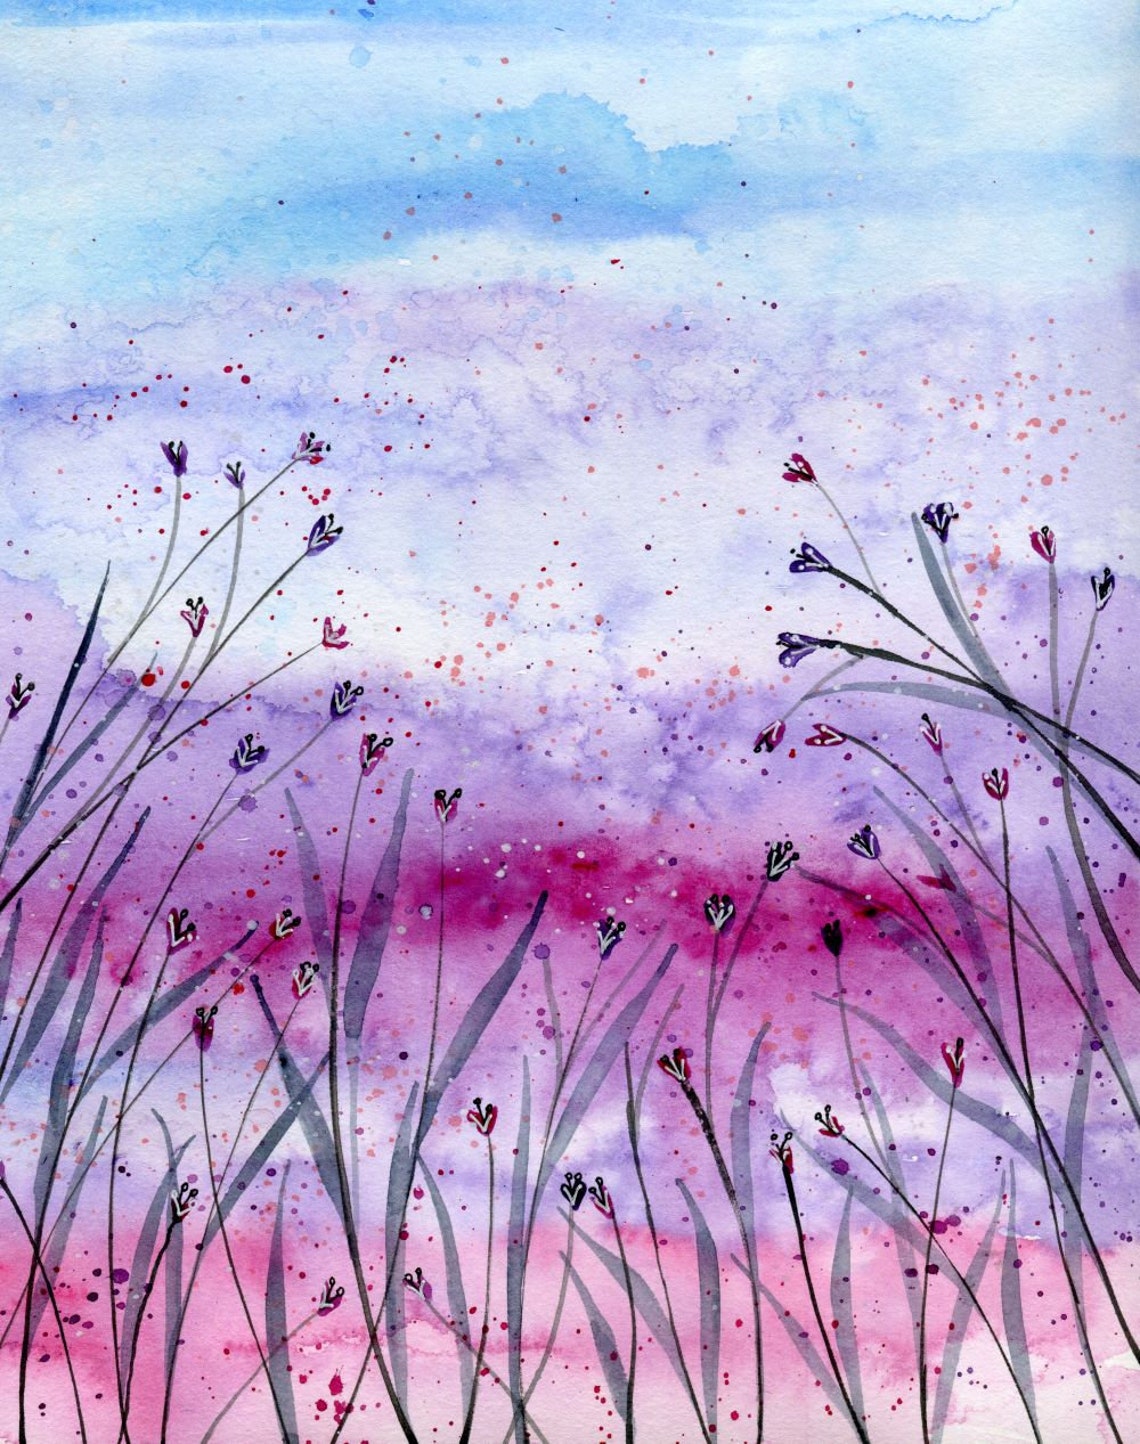 Sweet morning - watercolour painting of a field of purple flowers by KLBailey Art